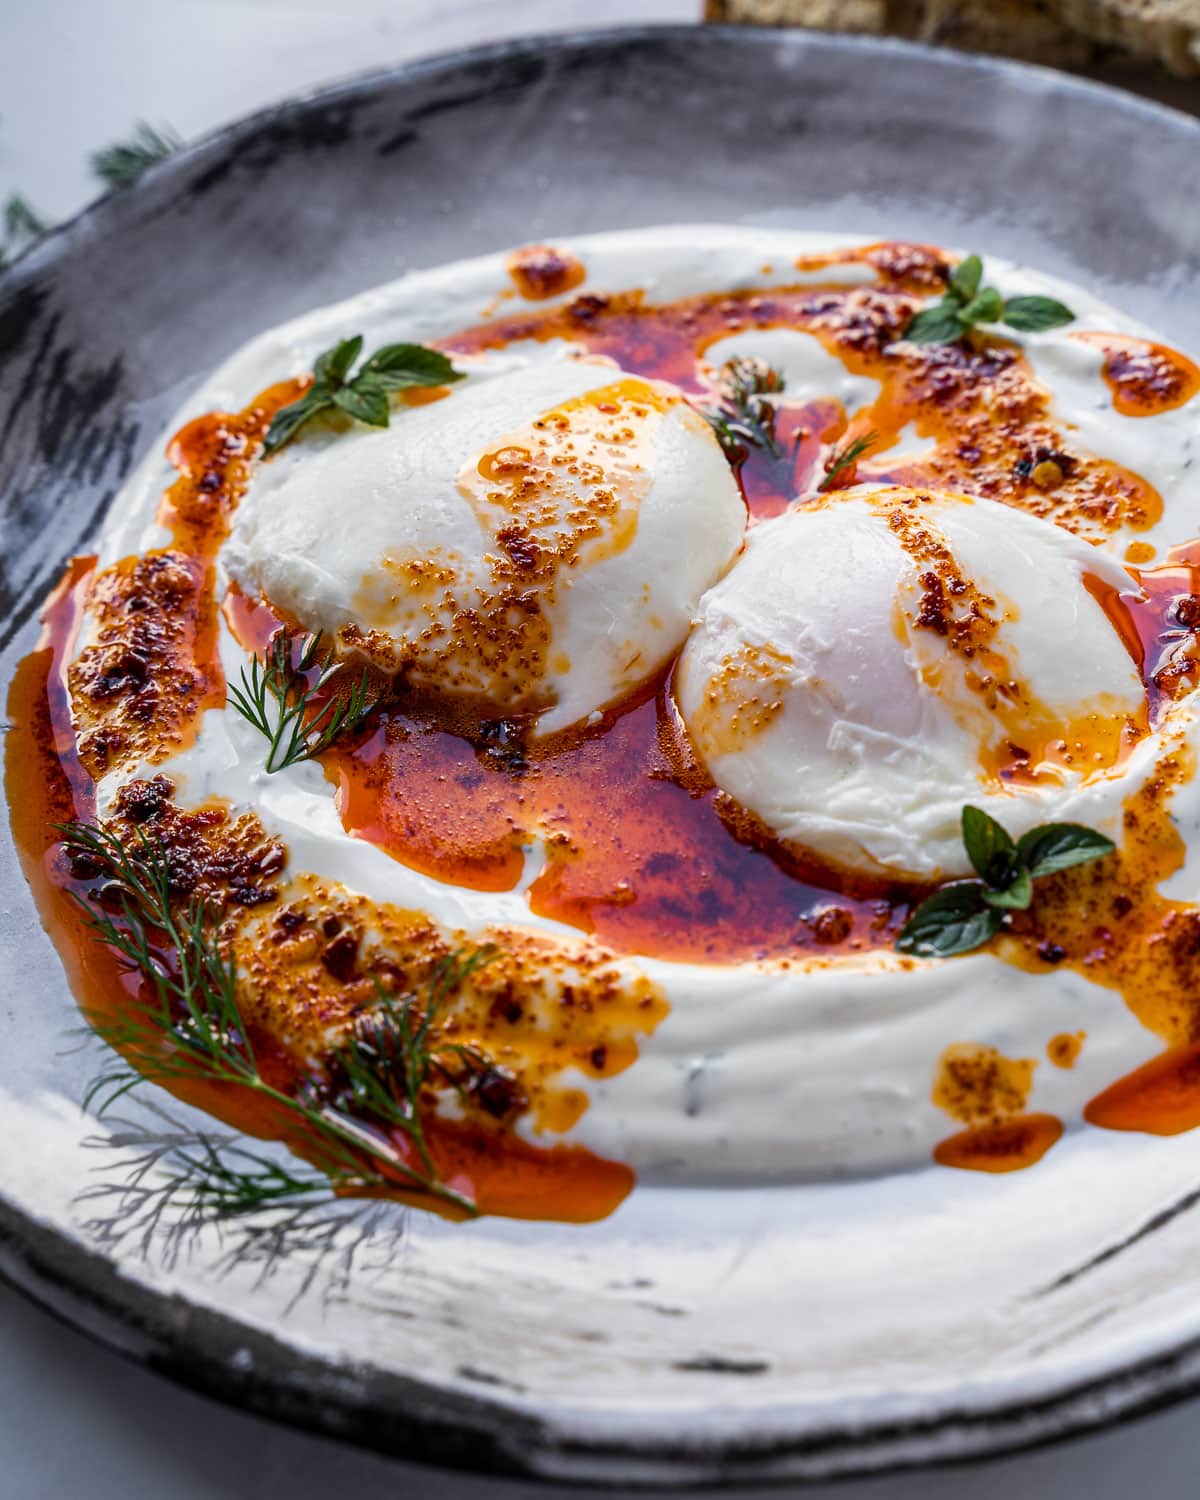 Eggs with red spiced butter sauce, and yogurt on a plate.